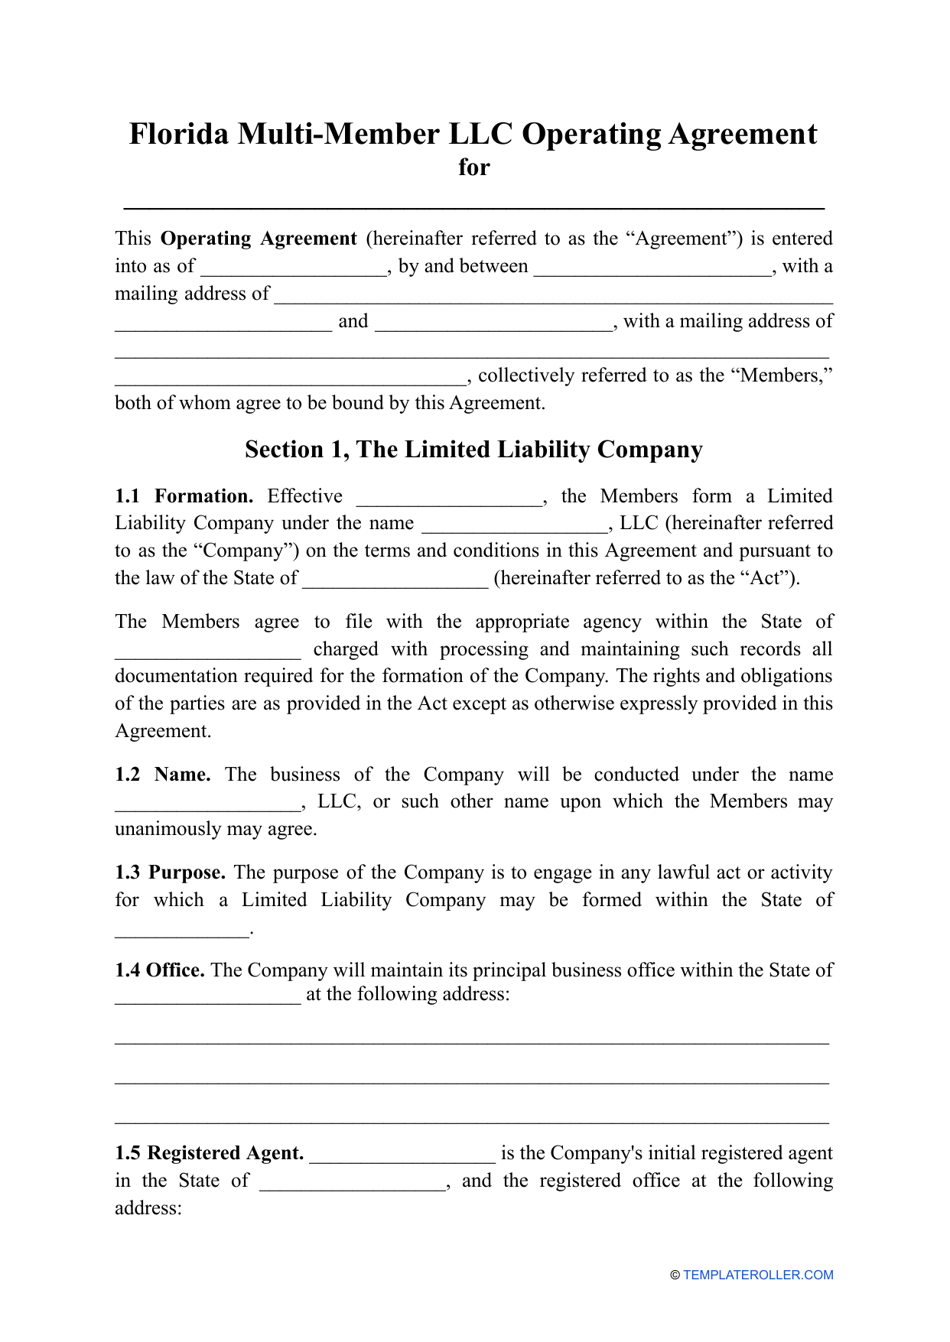 Multi-Member LLC Operating Agreement Template - Florida, Page 1